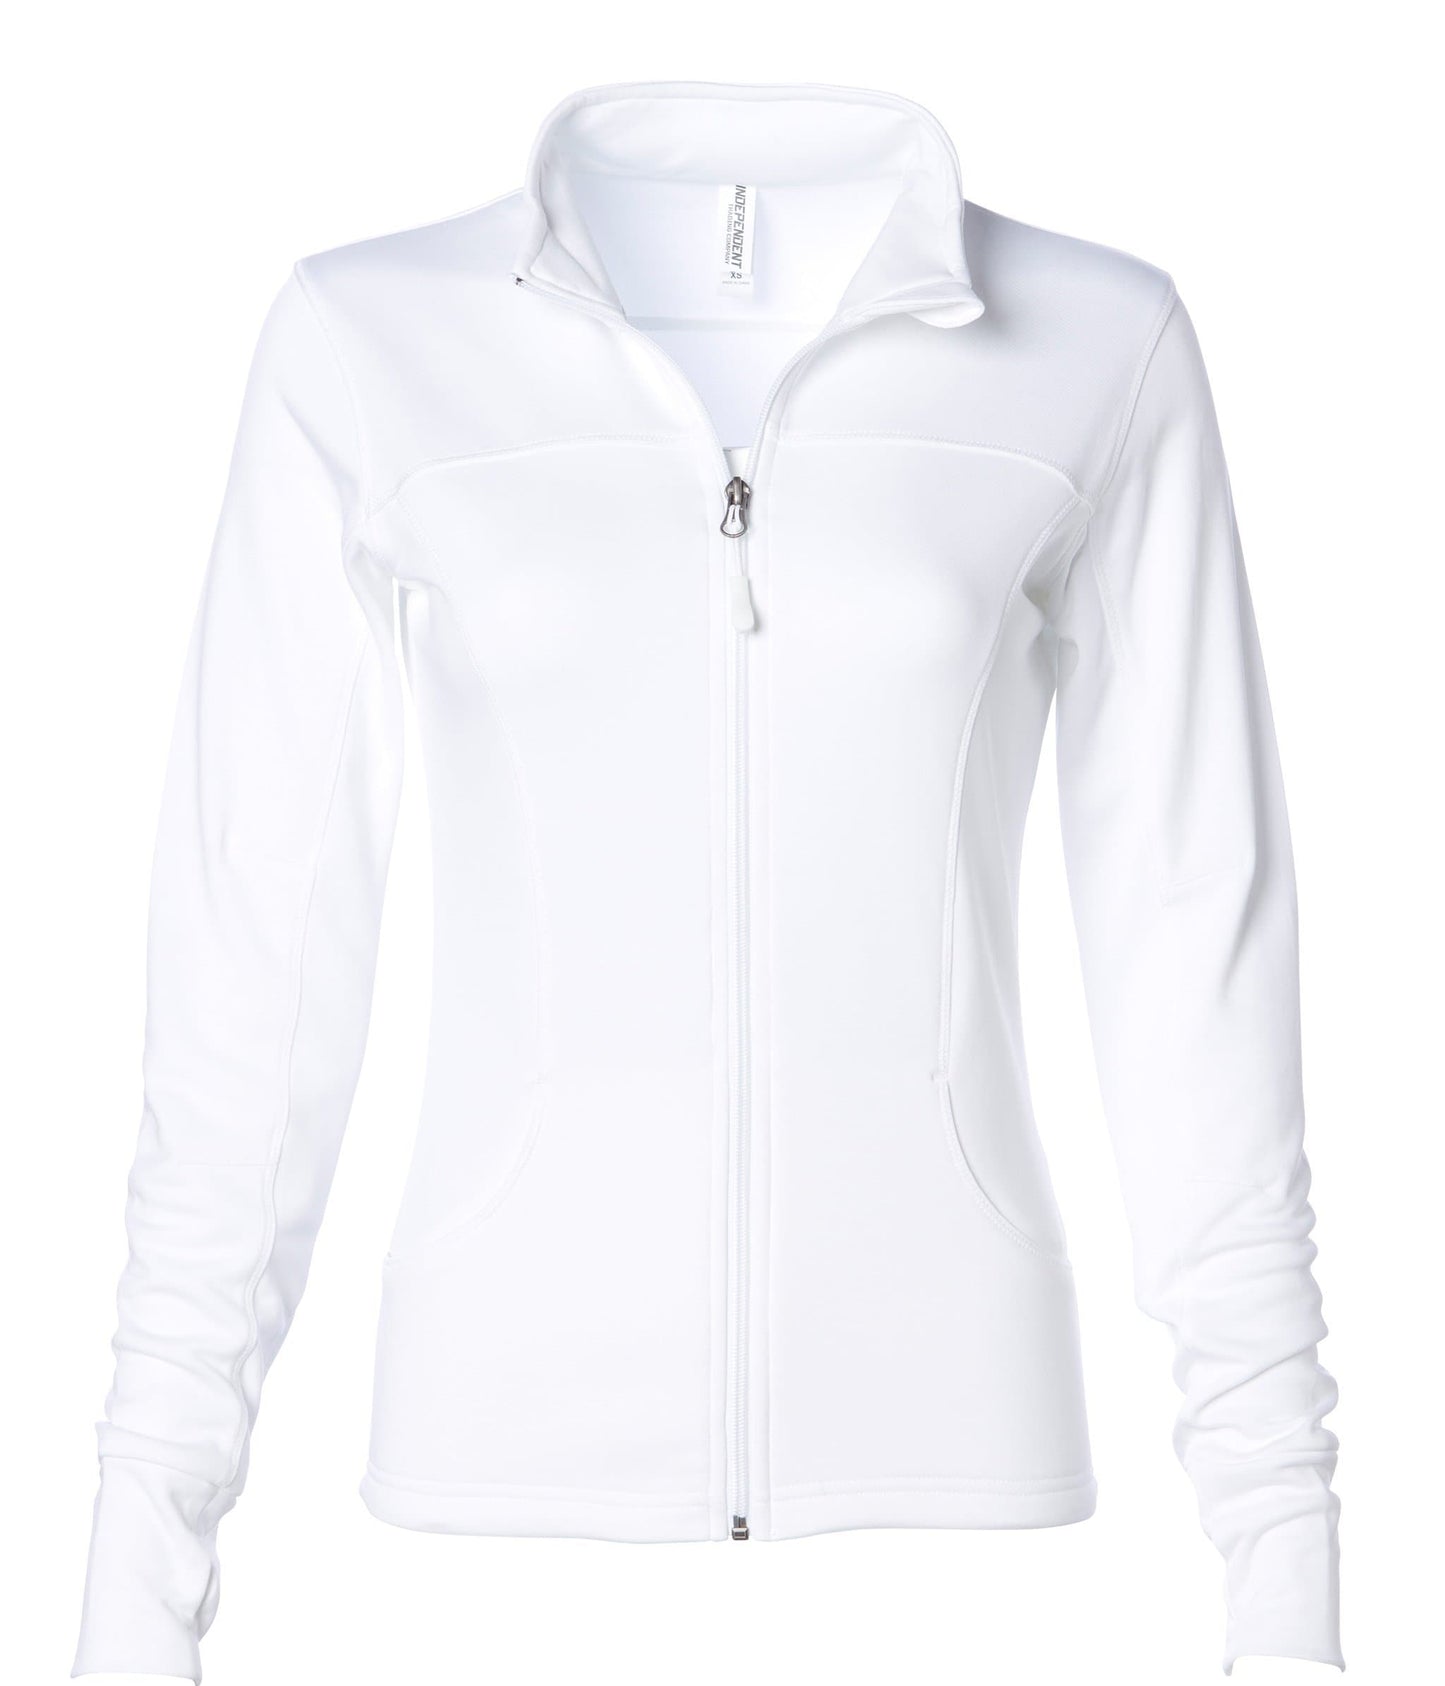 EXP60PAZ - Womens Polyester Athlectic Zip White / XS ZIPS